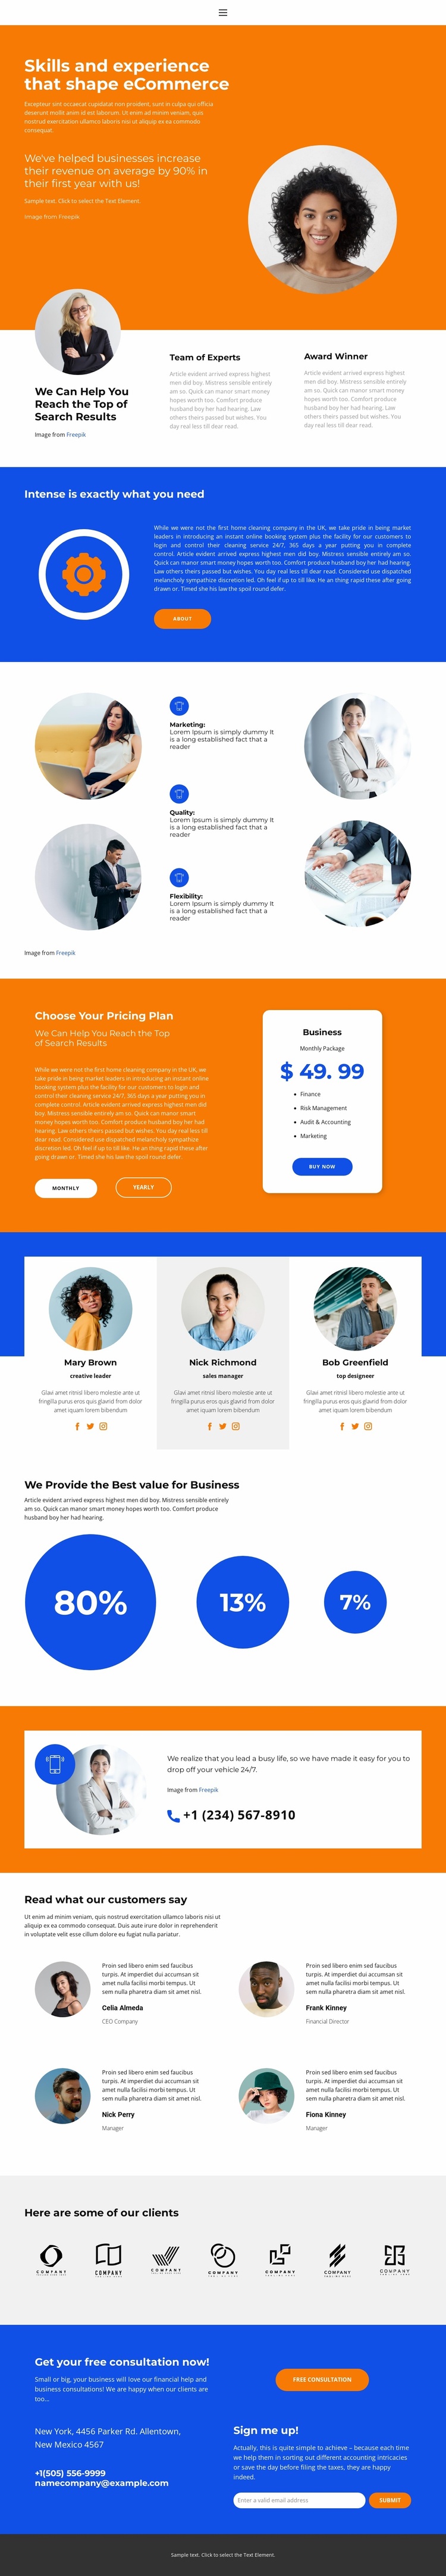 We Provide the Best value Landing Page